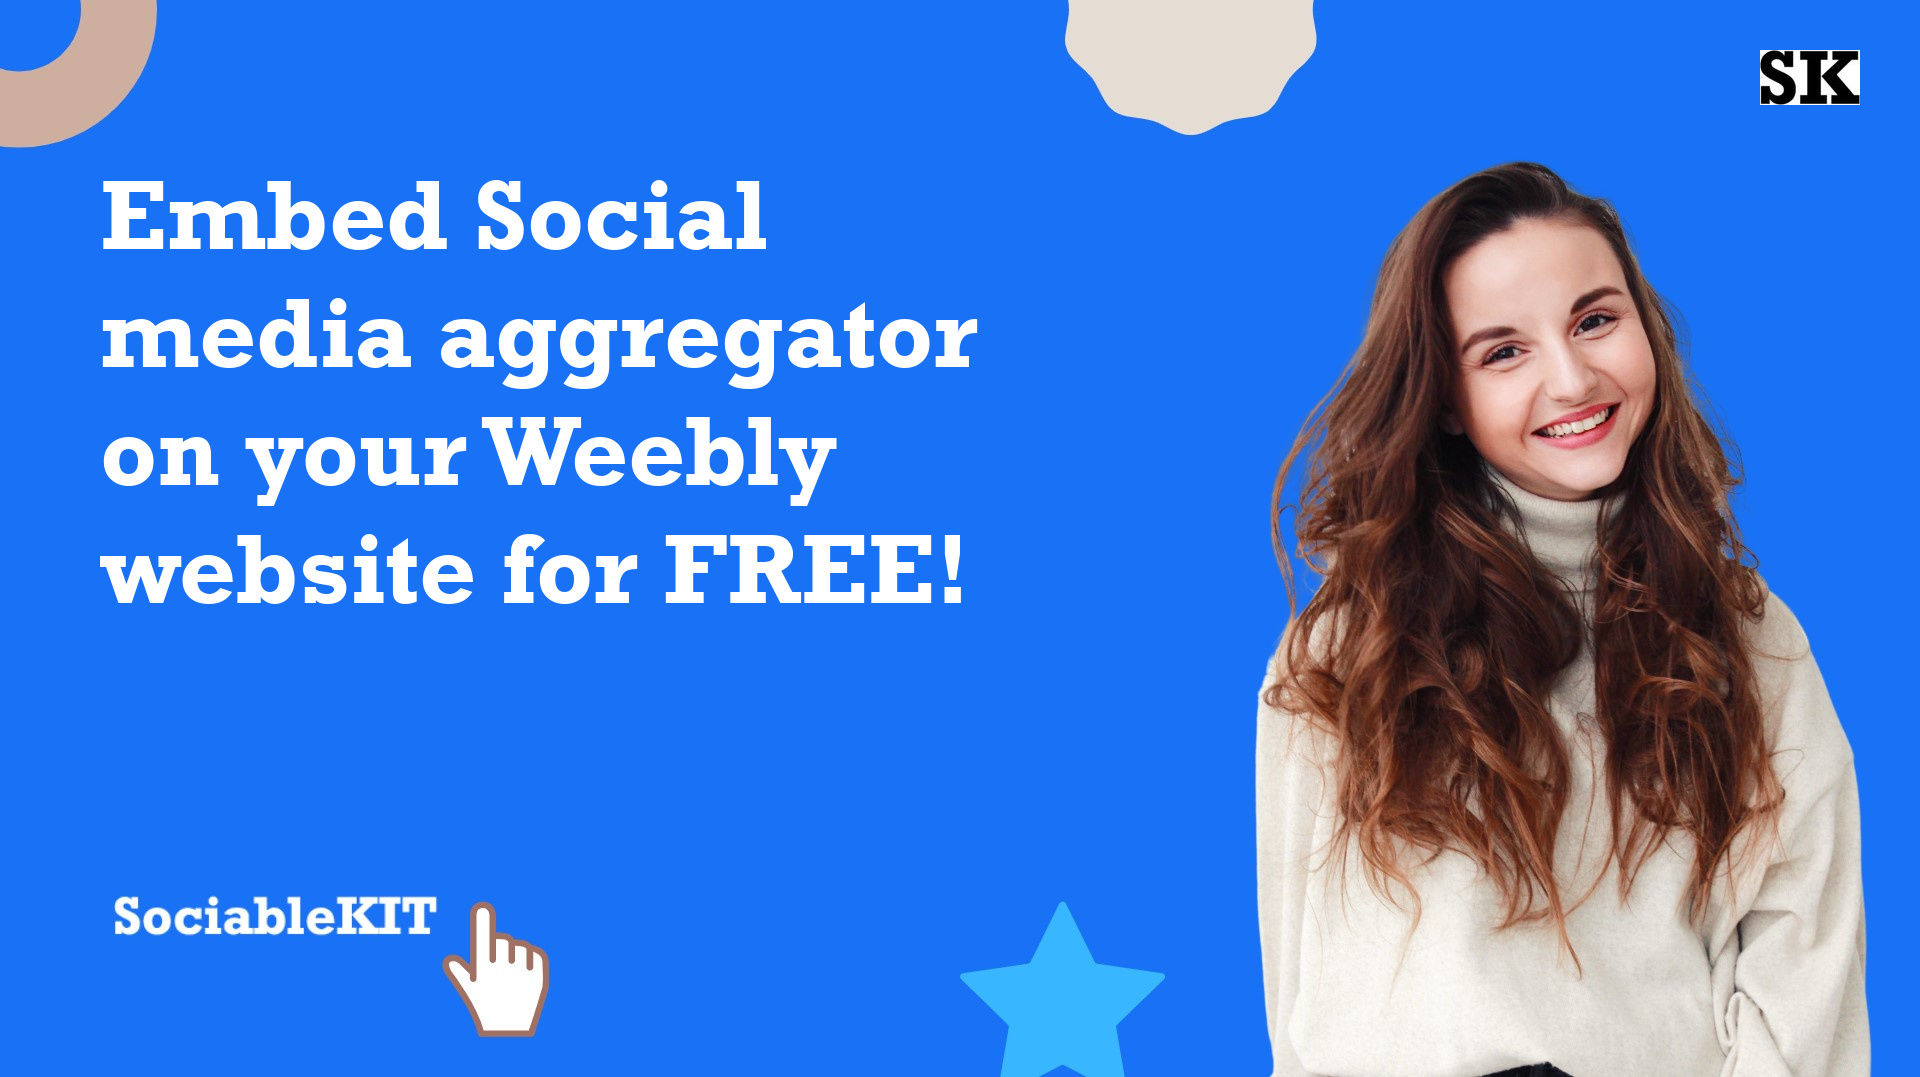 How to embed Social media aggregator on your Weebly website for FREE?